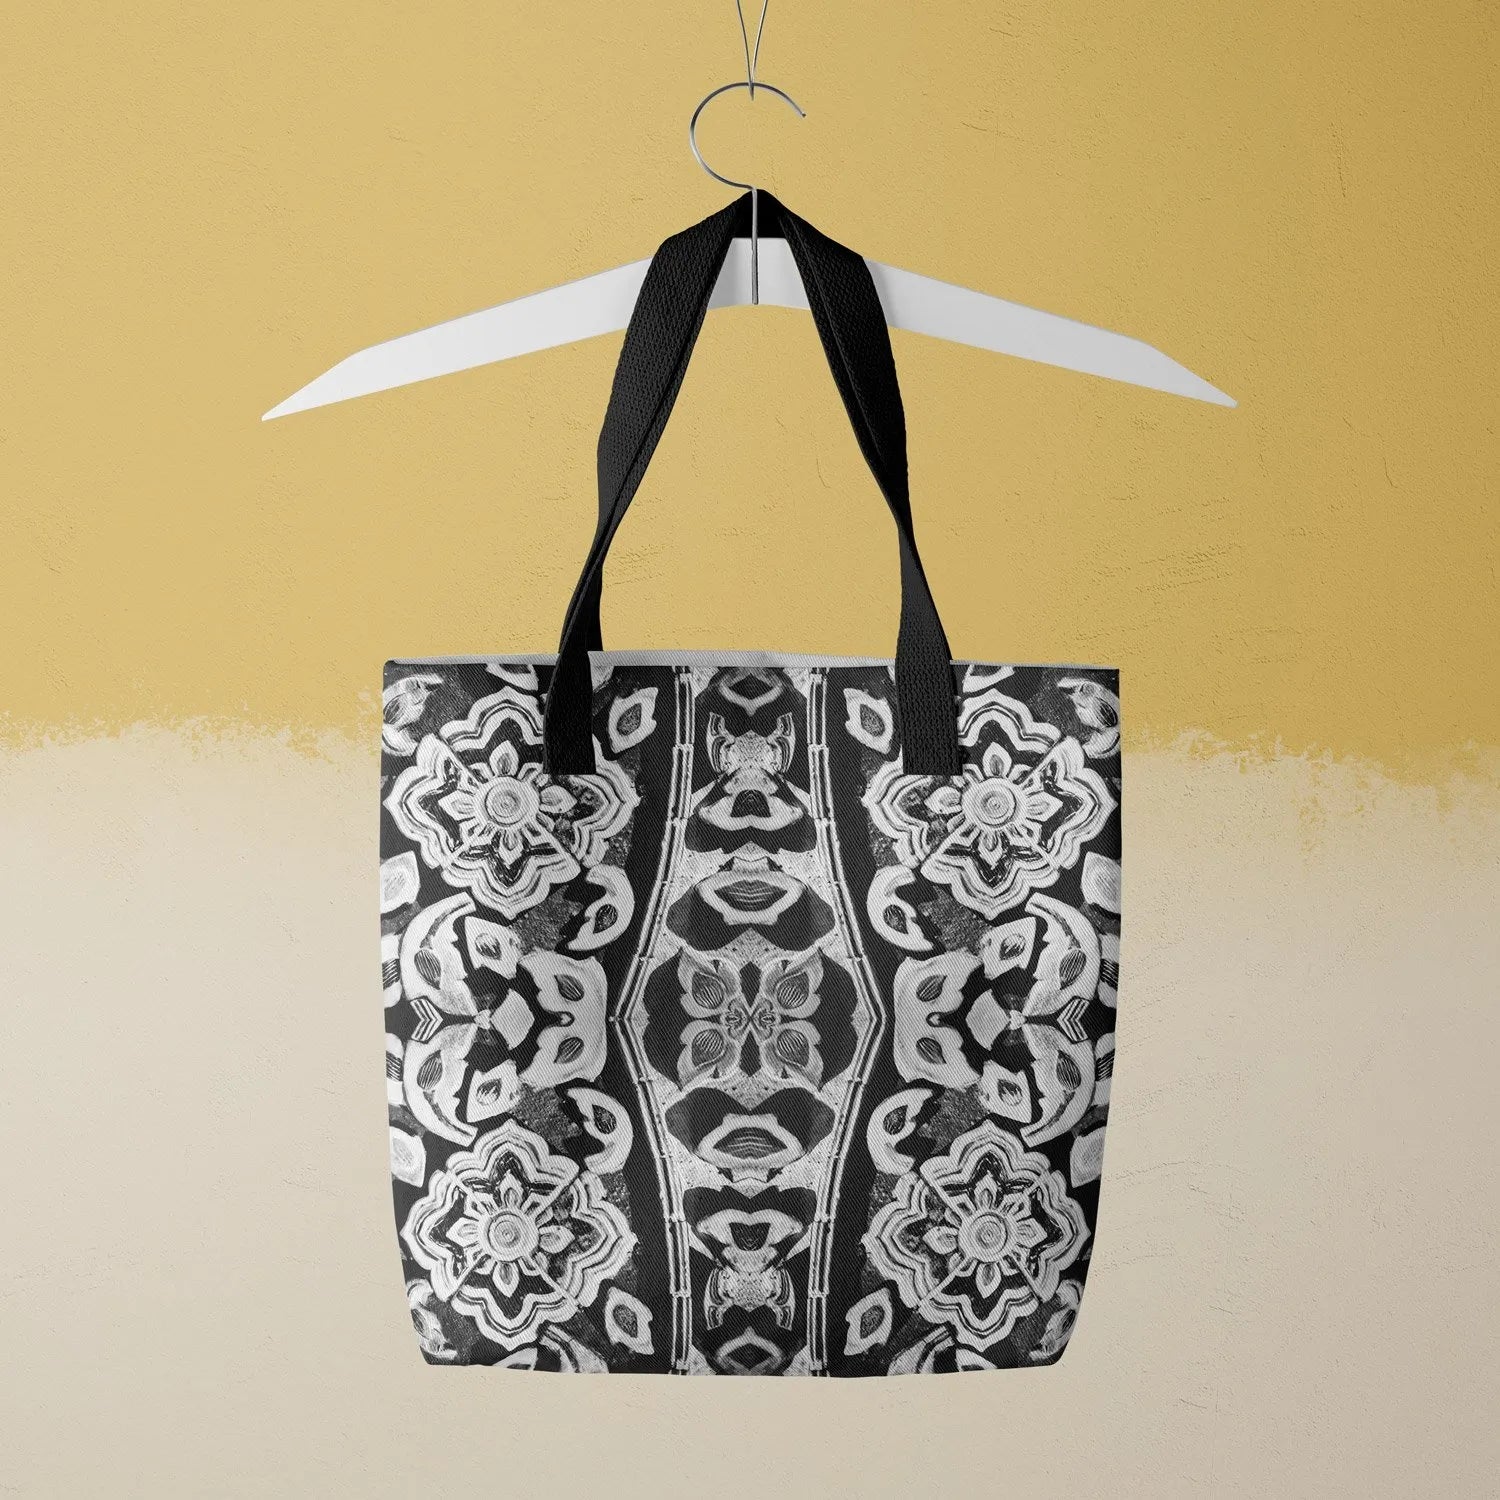 Masala Thai Tote - Black And White - Heavy Duty Reusable Grocery Bag - Black Handles - Shopping Totes - Aesthetic Art